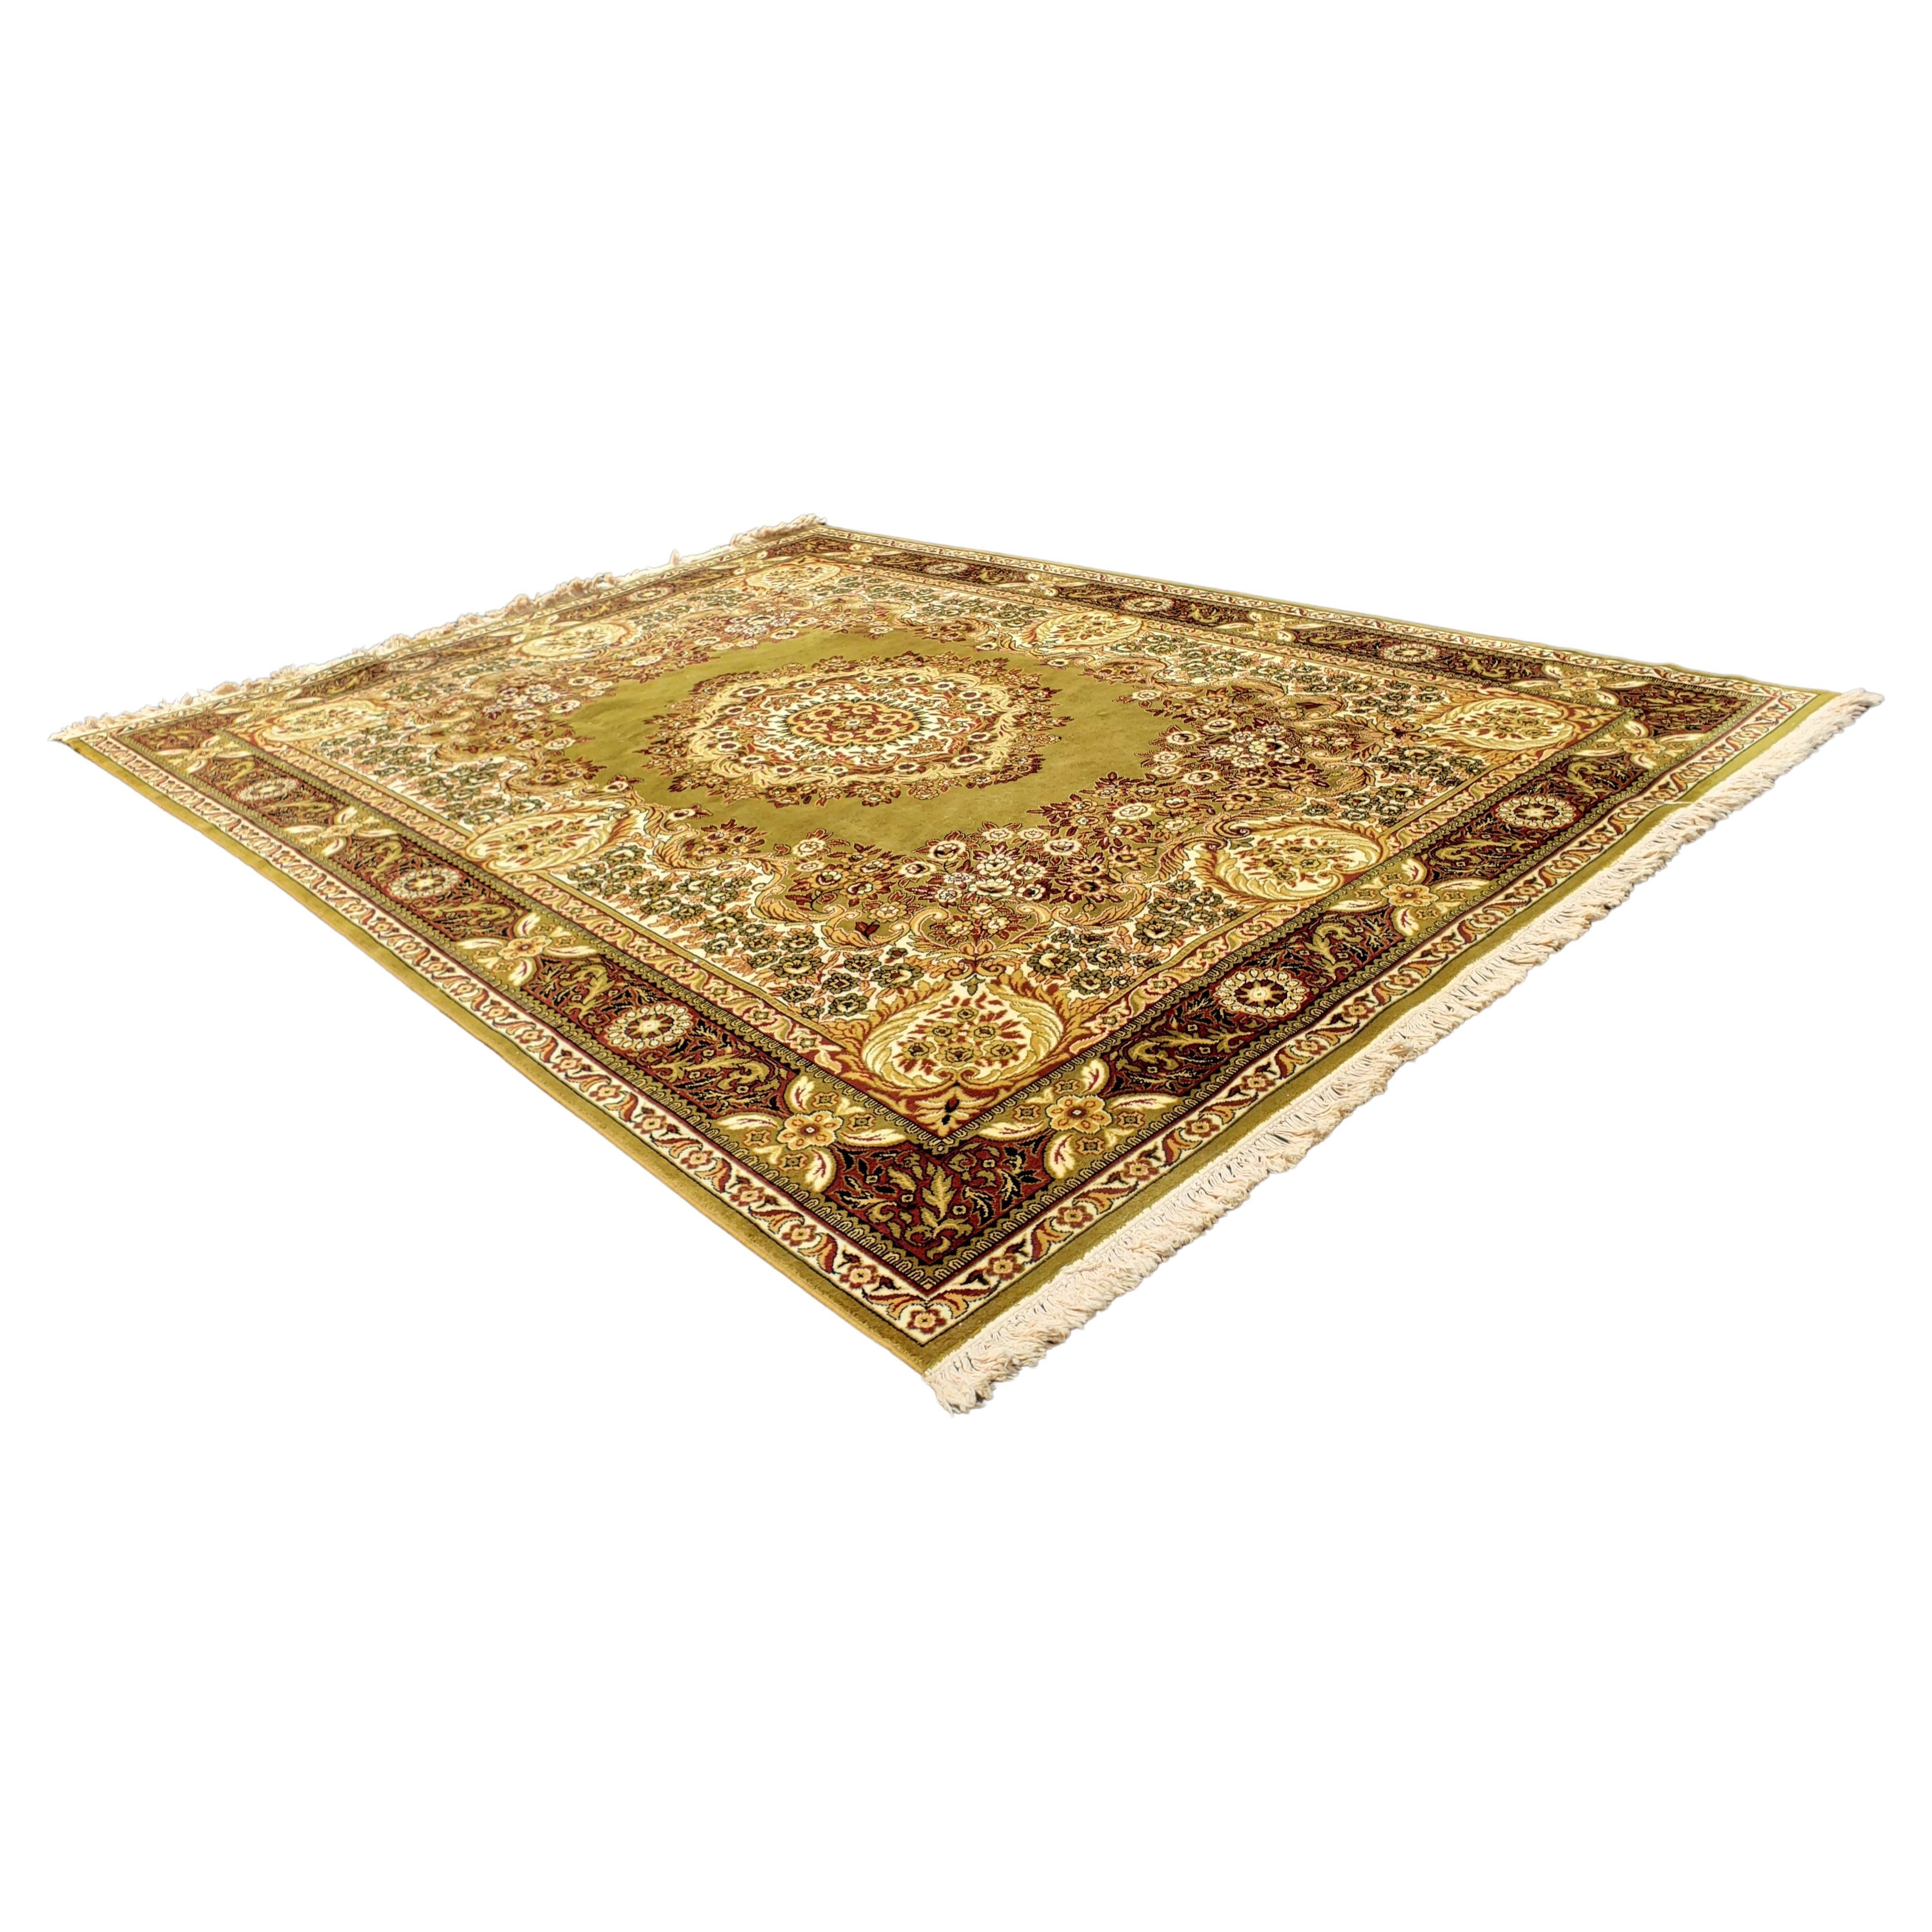 X-Large 100% Wool Pile Couristan Rug with Center Medallion For Sale